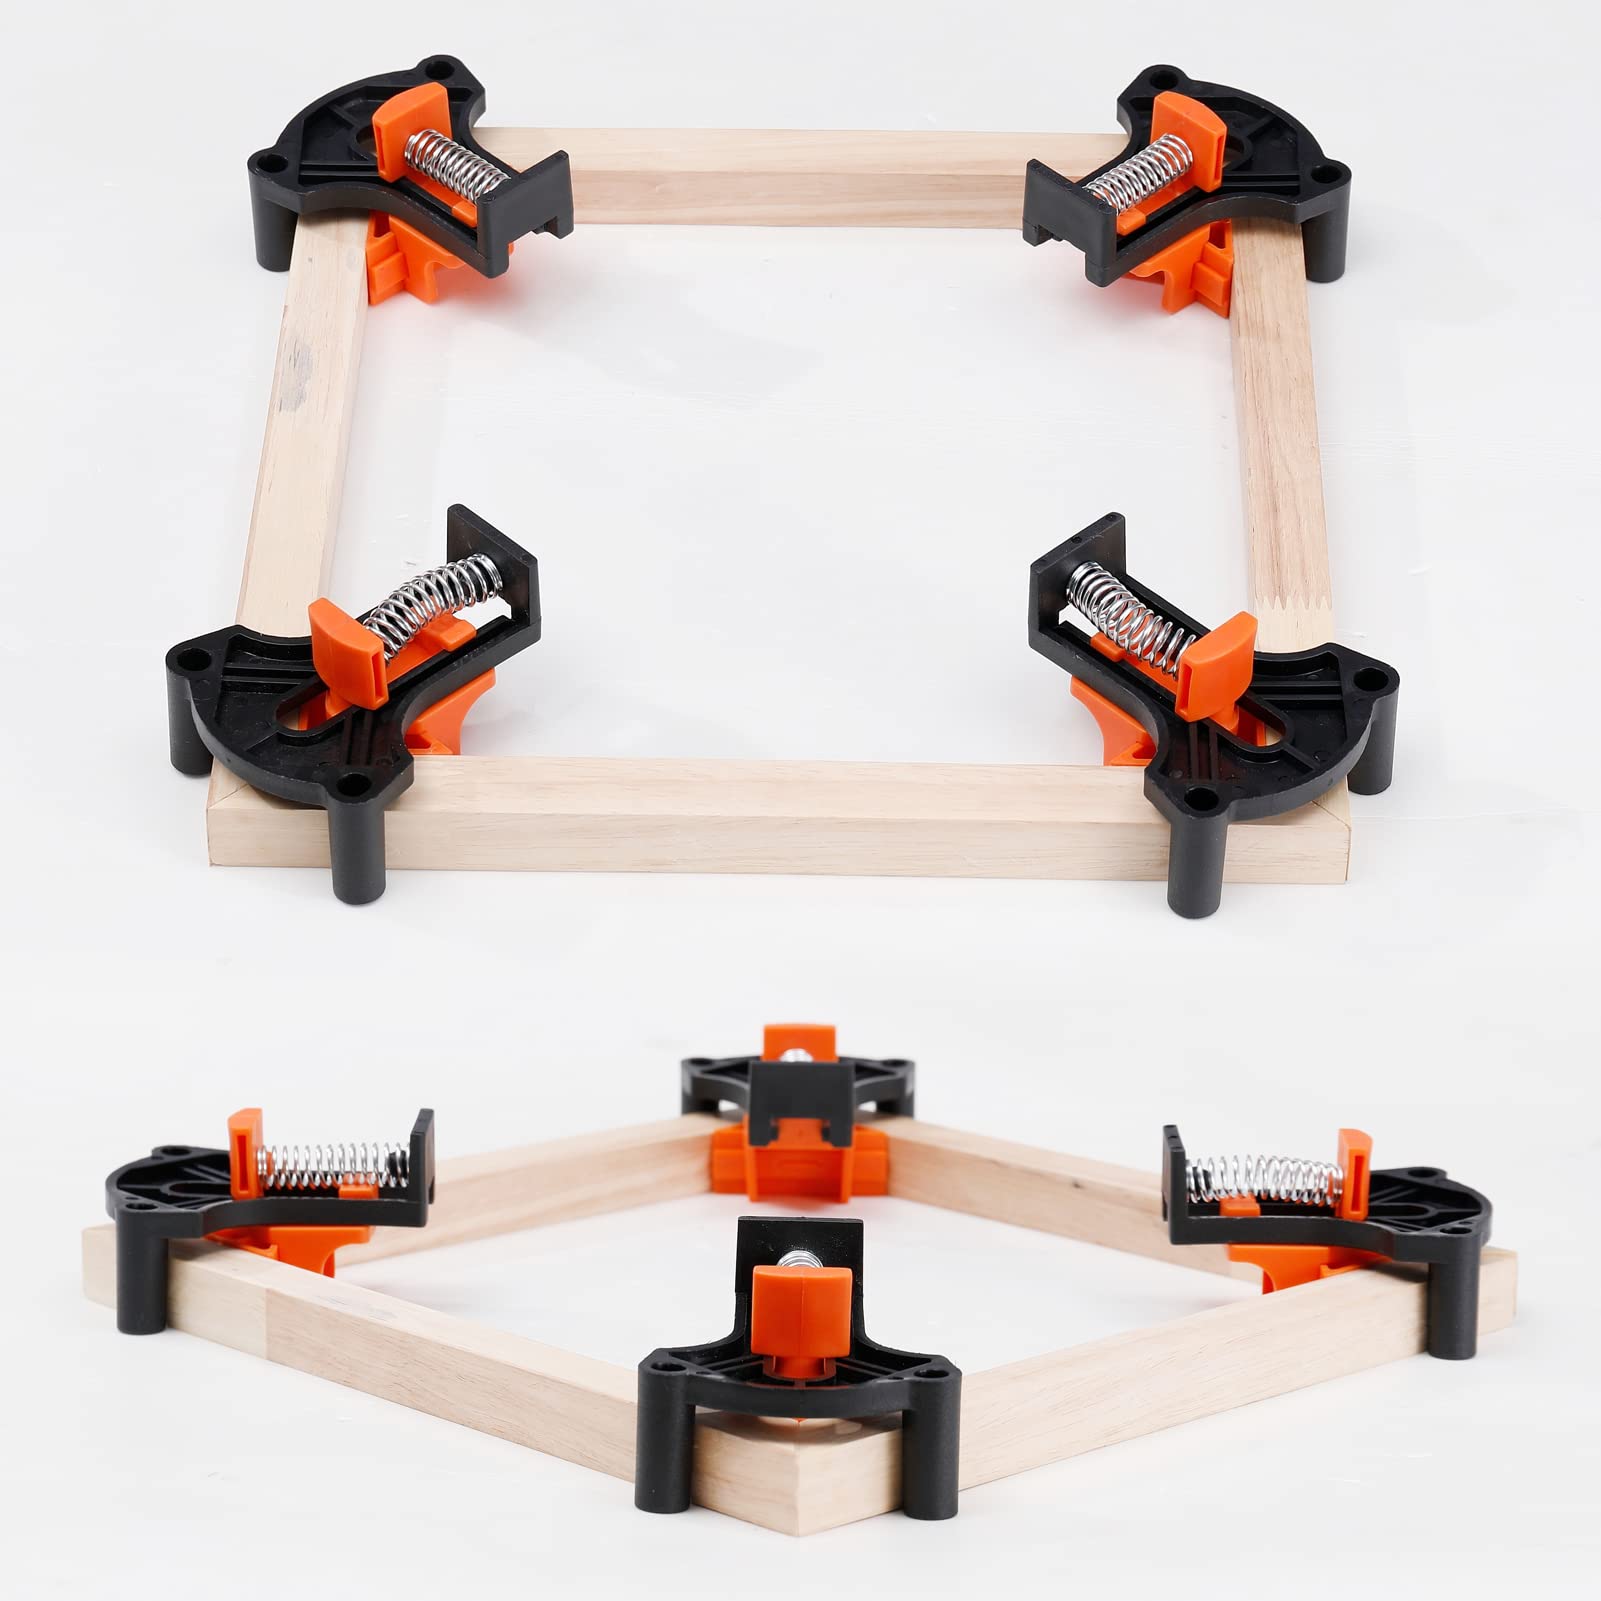 60/90/120 Degree Multi Angle Pro Corner Clamp for Woodworking Set of 4, Adjustable Spring Loaded Right Clamp Tools, Carson Carpentry, Frame Cabinet Wood Tools Accessories